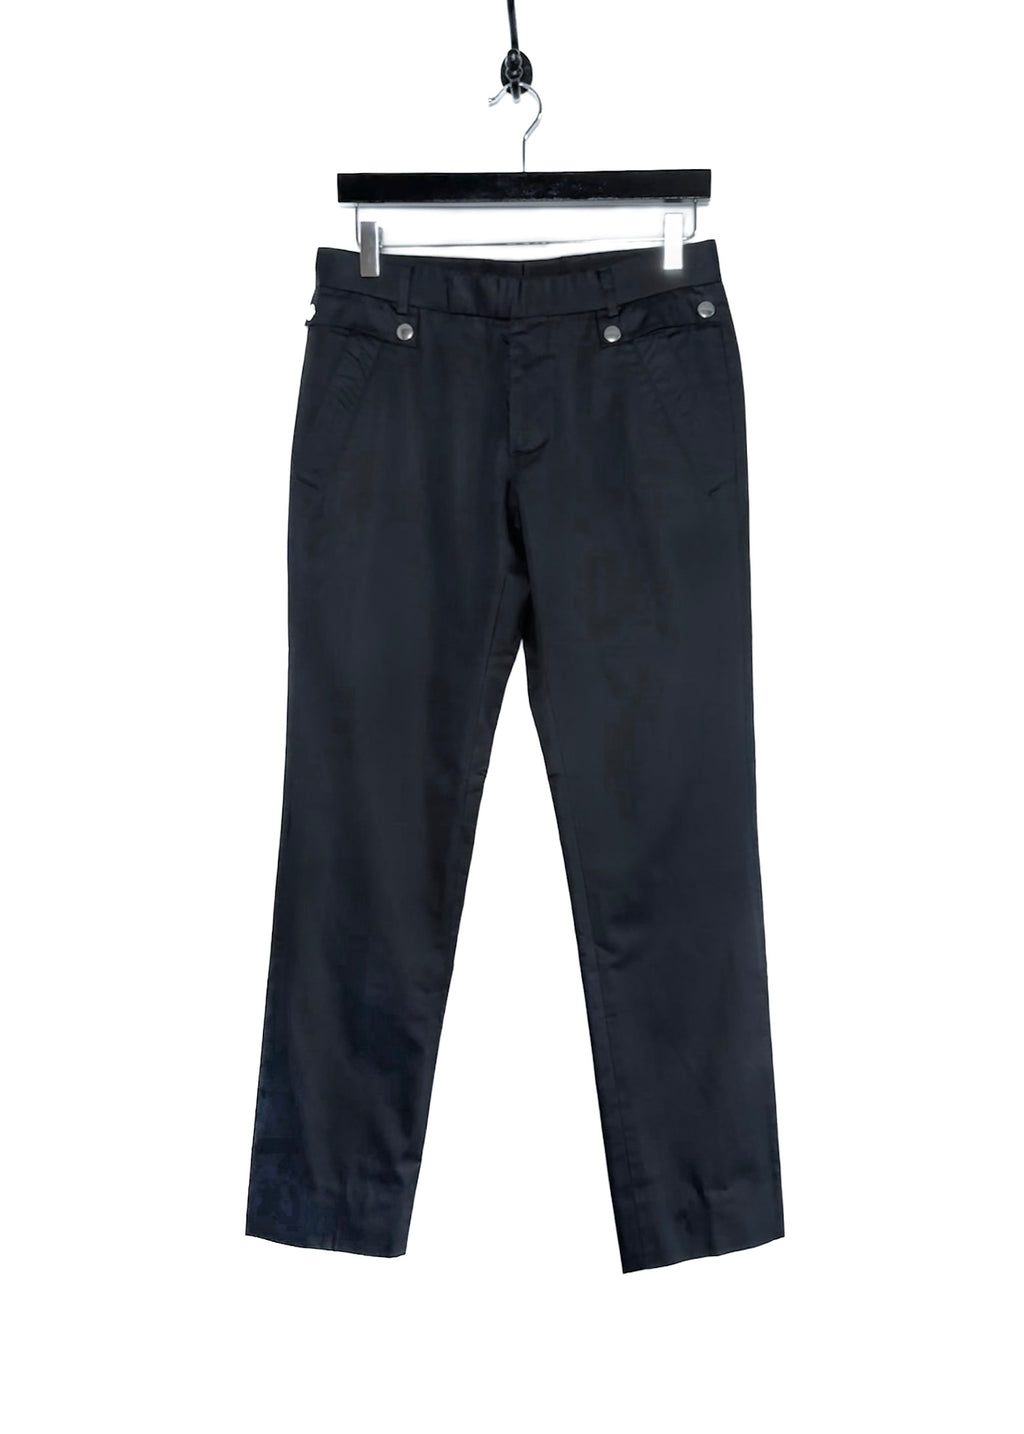 Dior Homme Navy Blue Chino Pocket Accents Pants